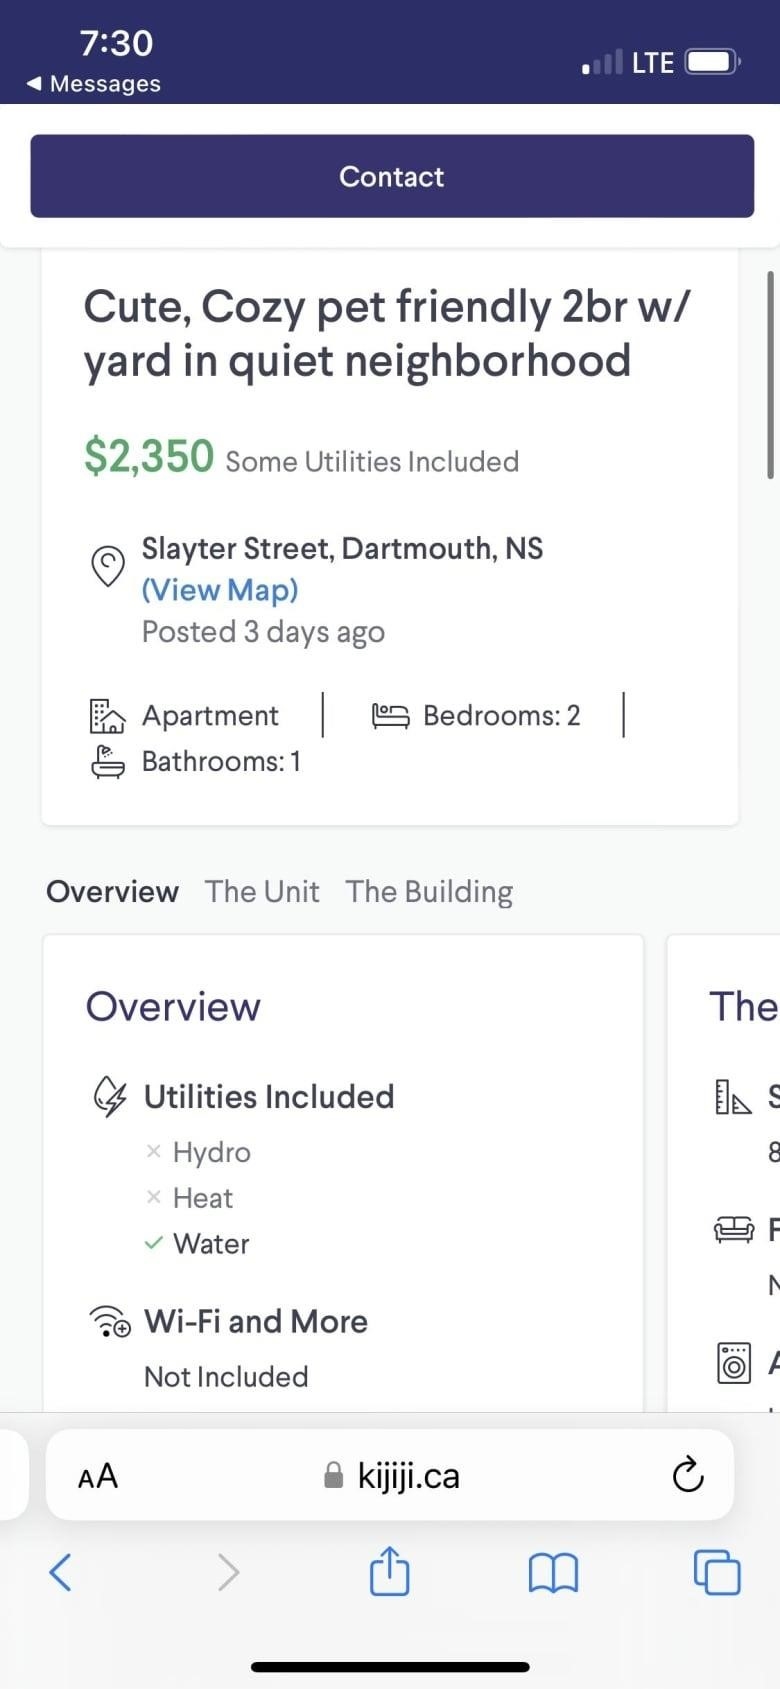 A rental ad shows a 2-bedroom apartment listed for $2,350.